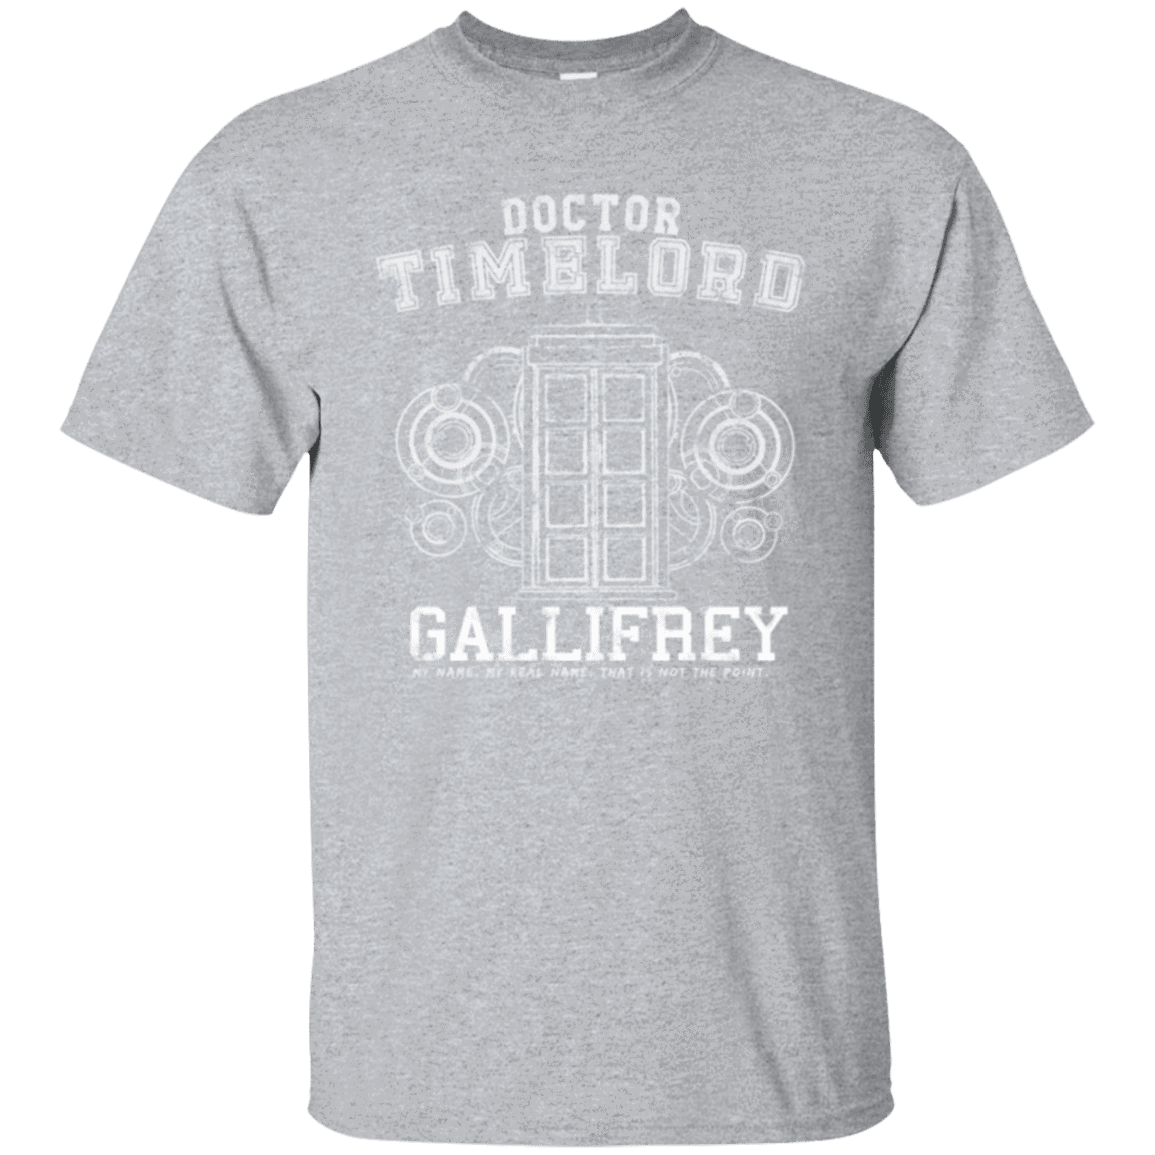 T-Shirts Sport Grey / Small Time Lord T-Shirt